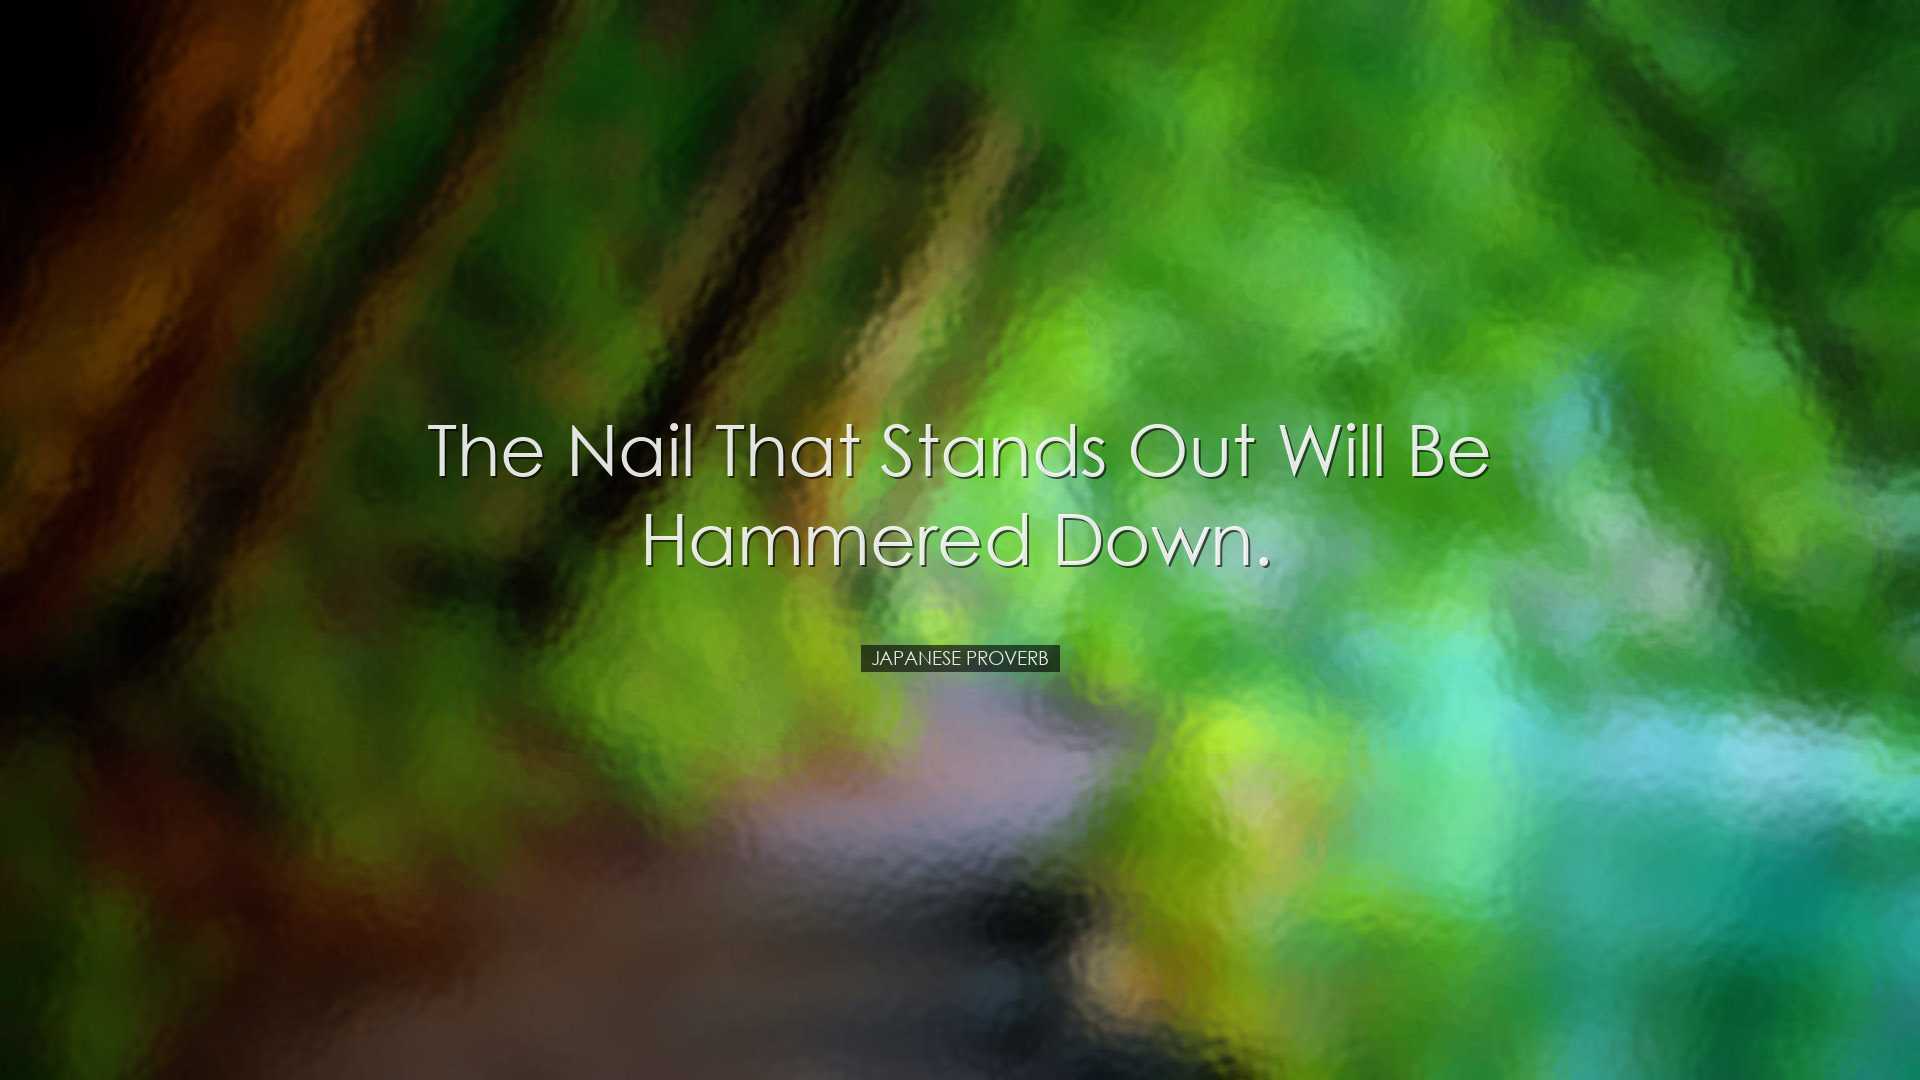 The nail that stands out will be hammered down. - Japanese Proverb